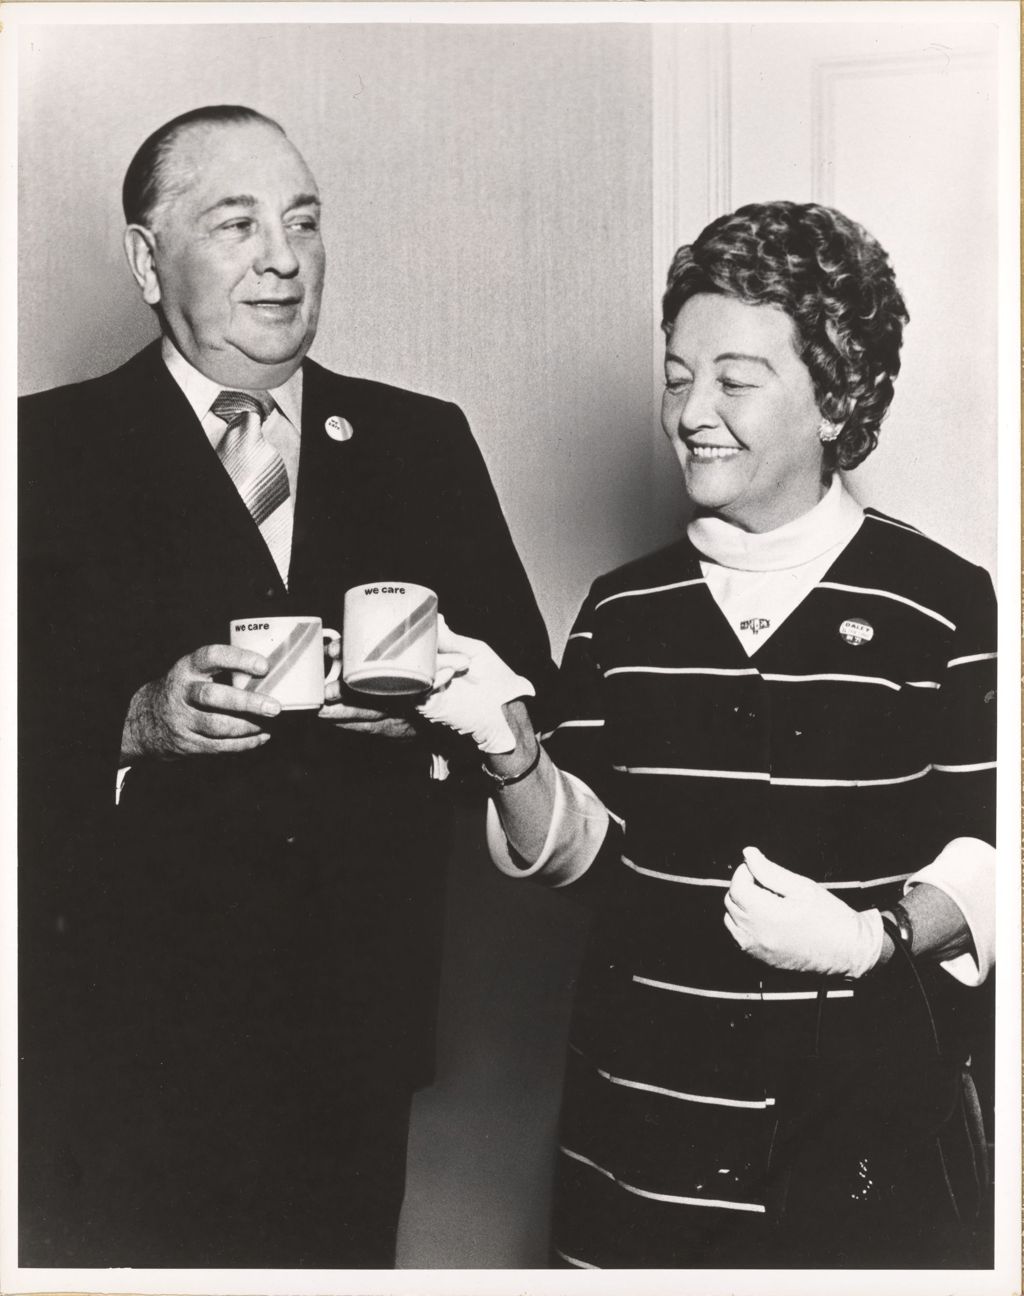 Miniature of Richard J. Daley and Eleanor Daley with "We Care" mugs